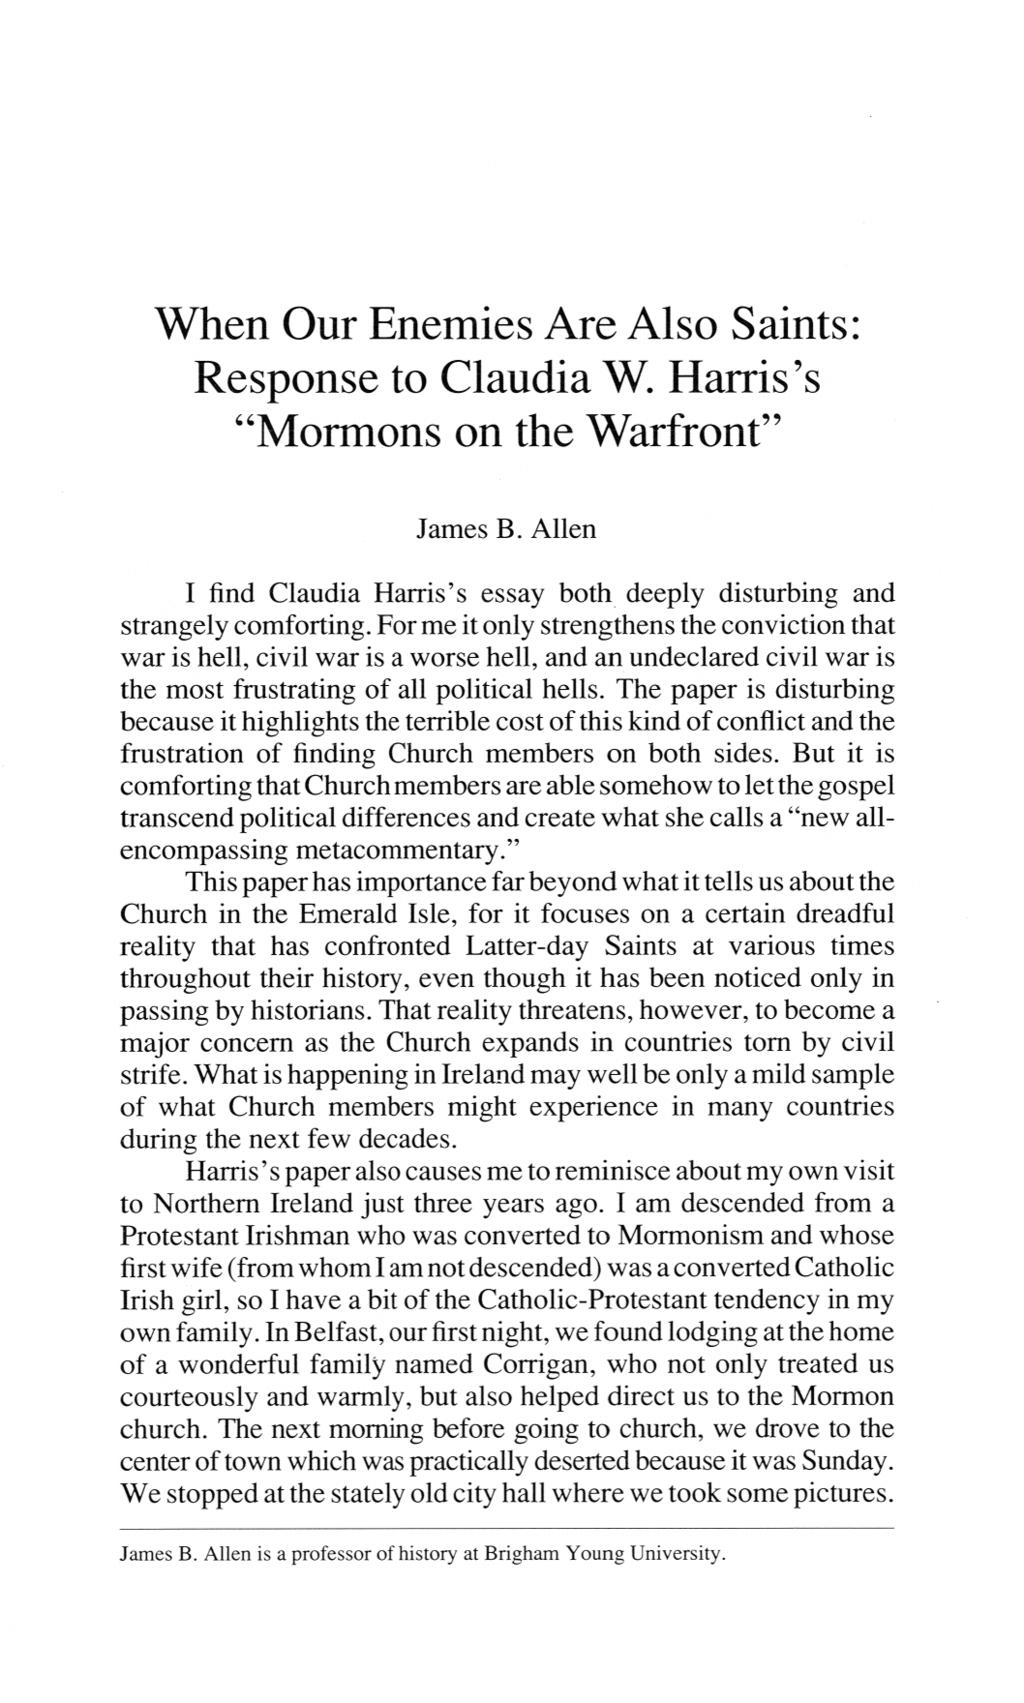 Allen: When Our Enemies Are Also Saints: Response to Claudia W.